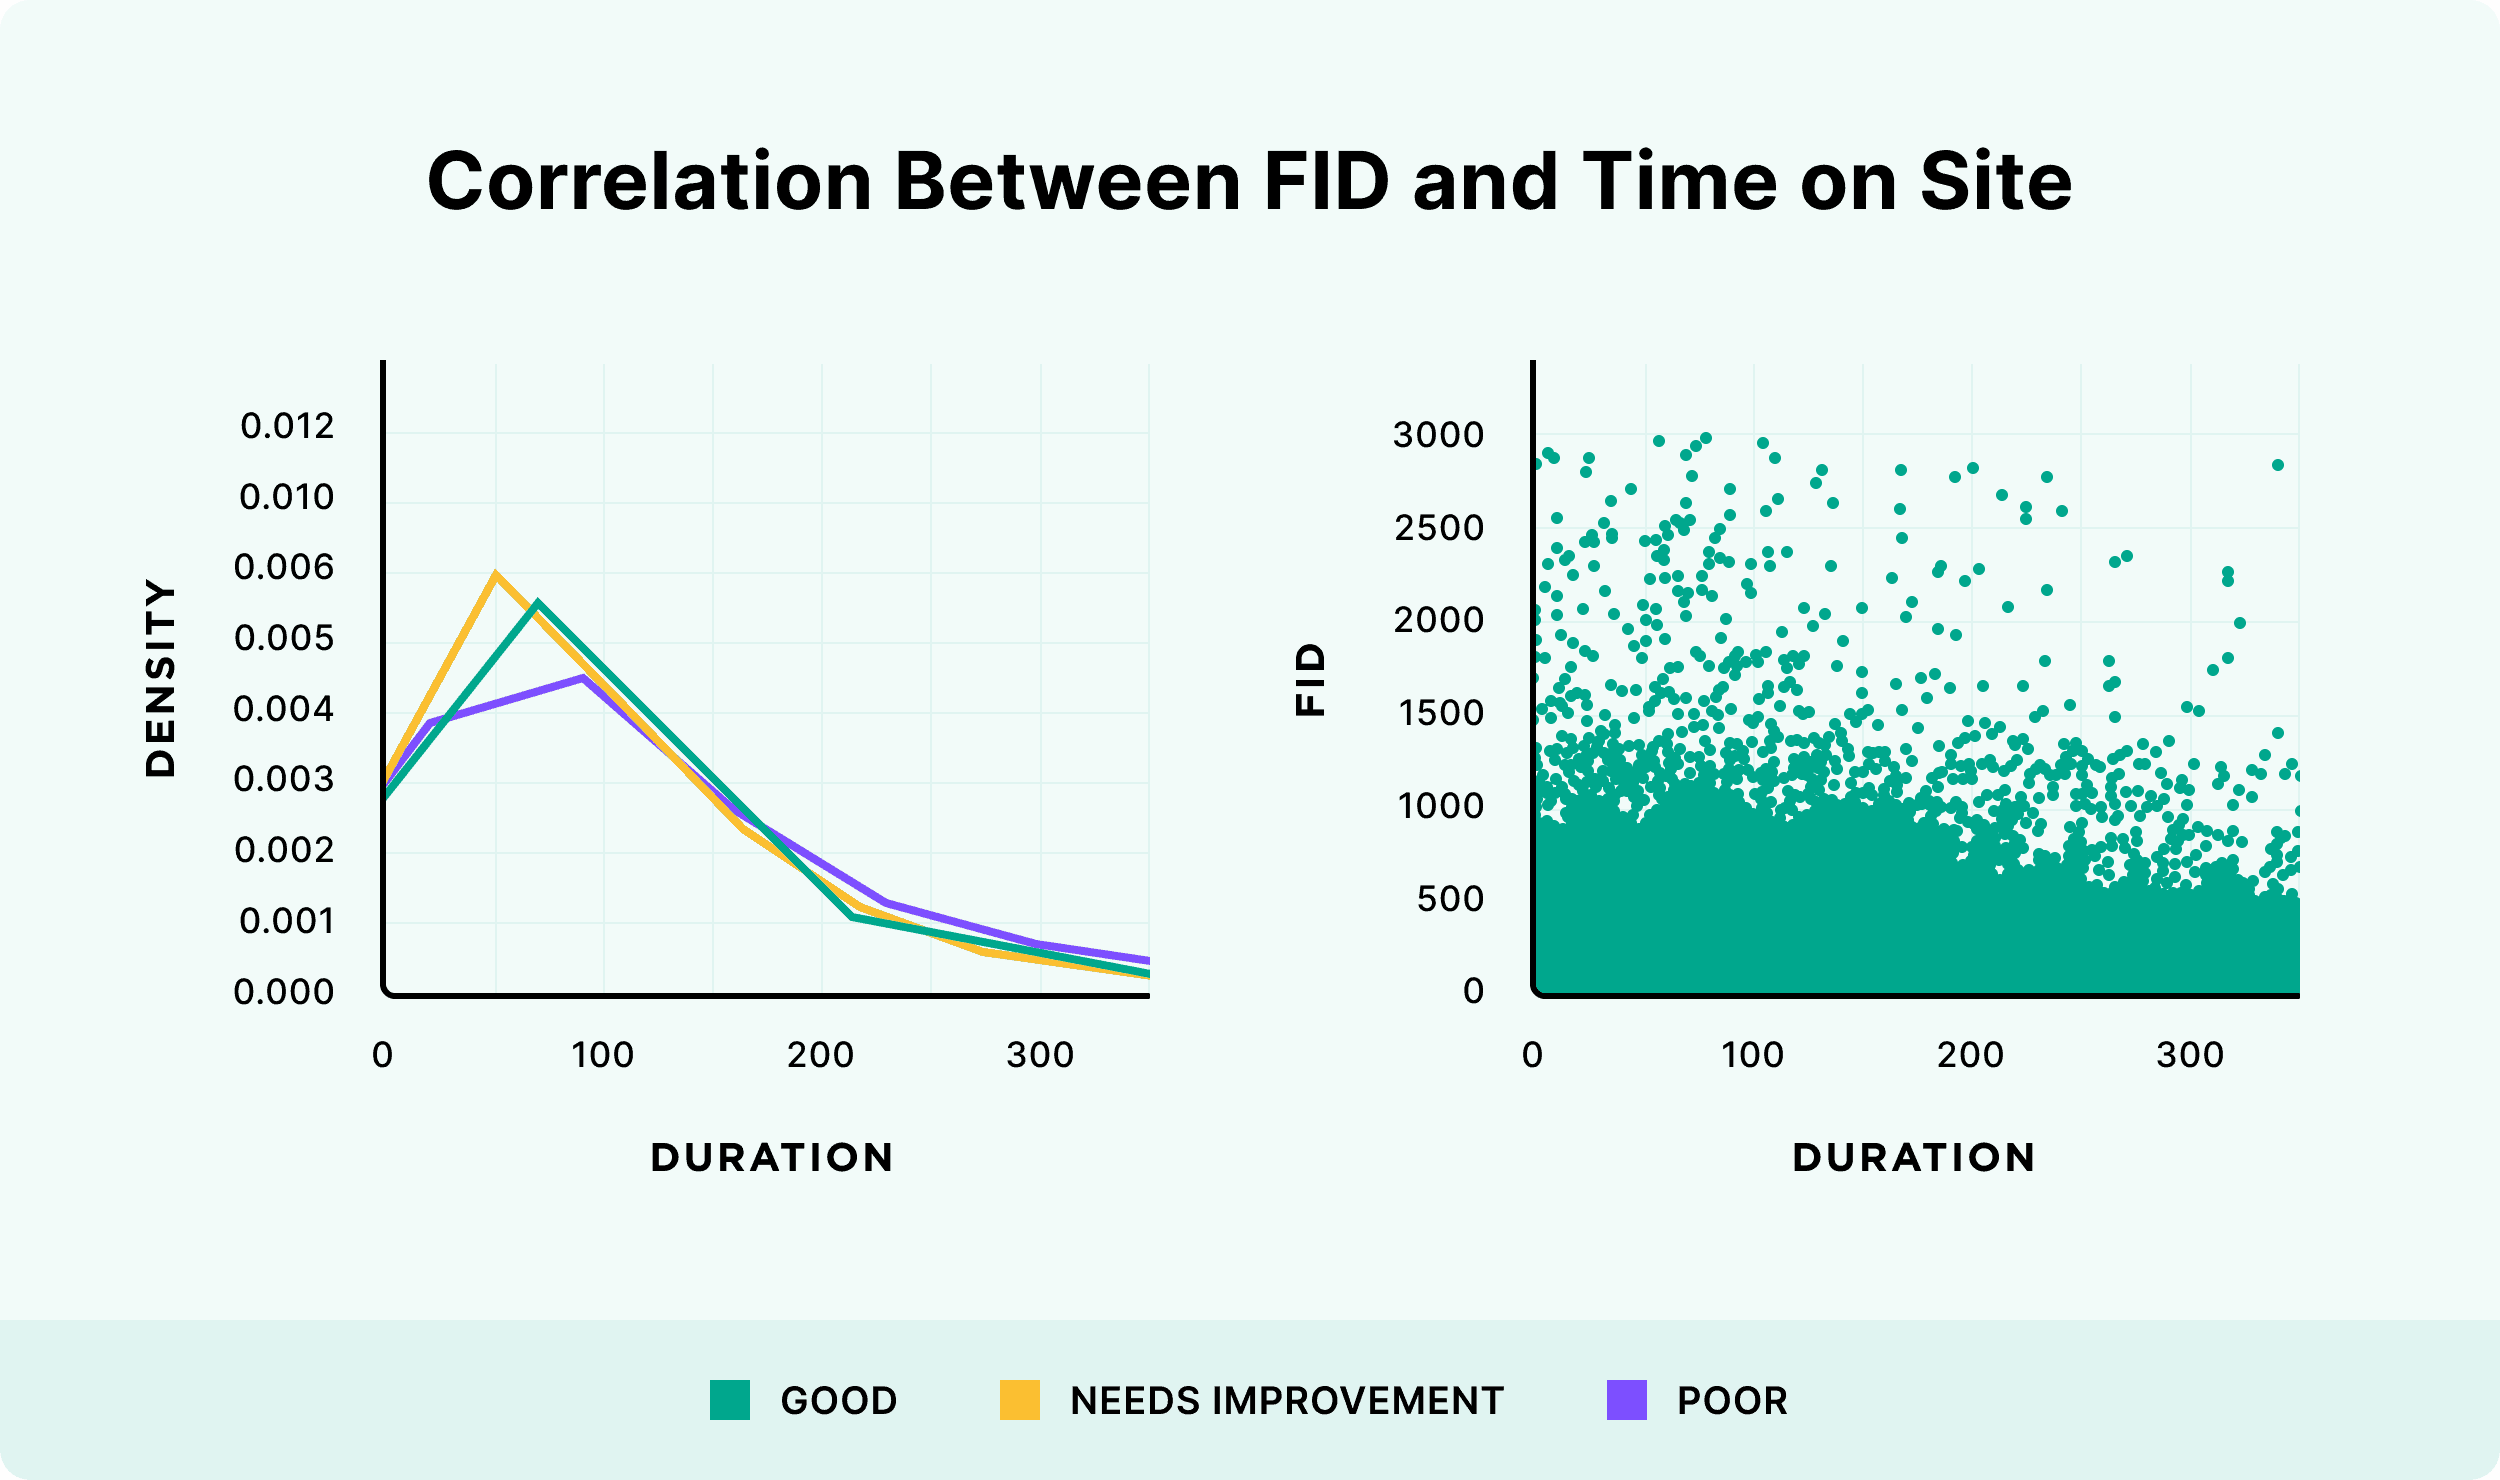 Correlation between FID and time on site